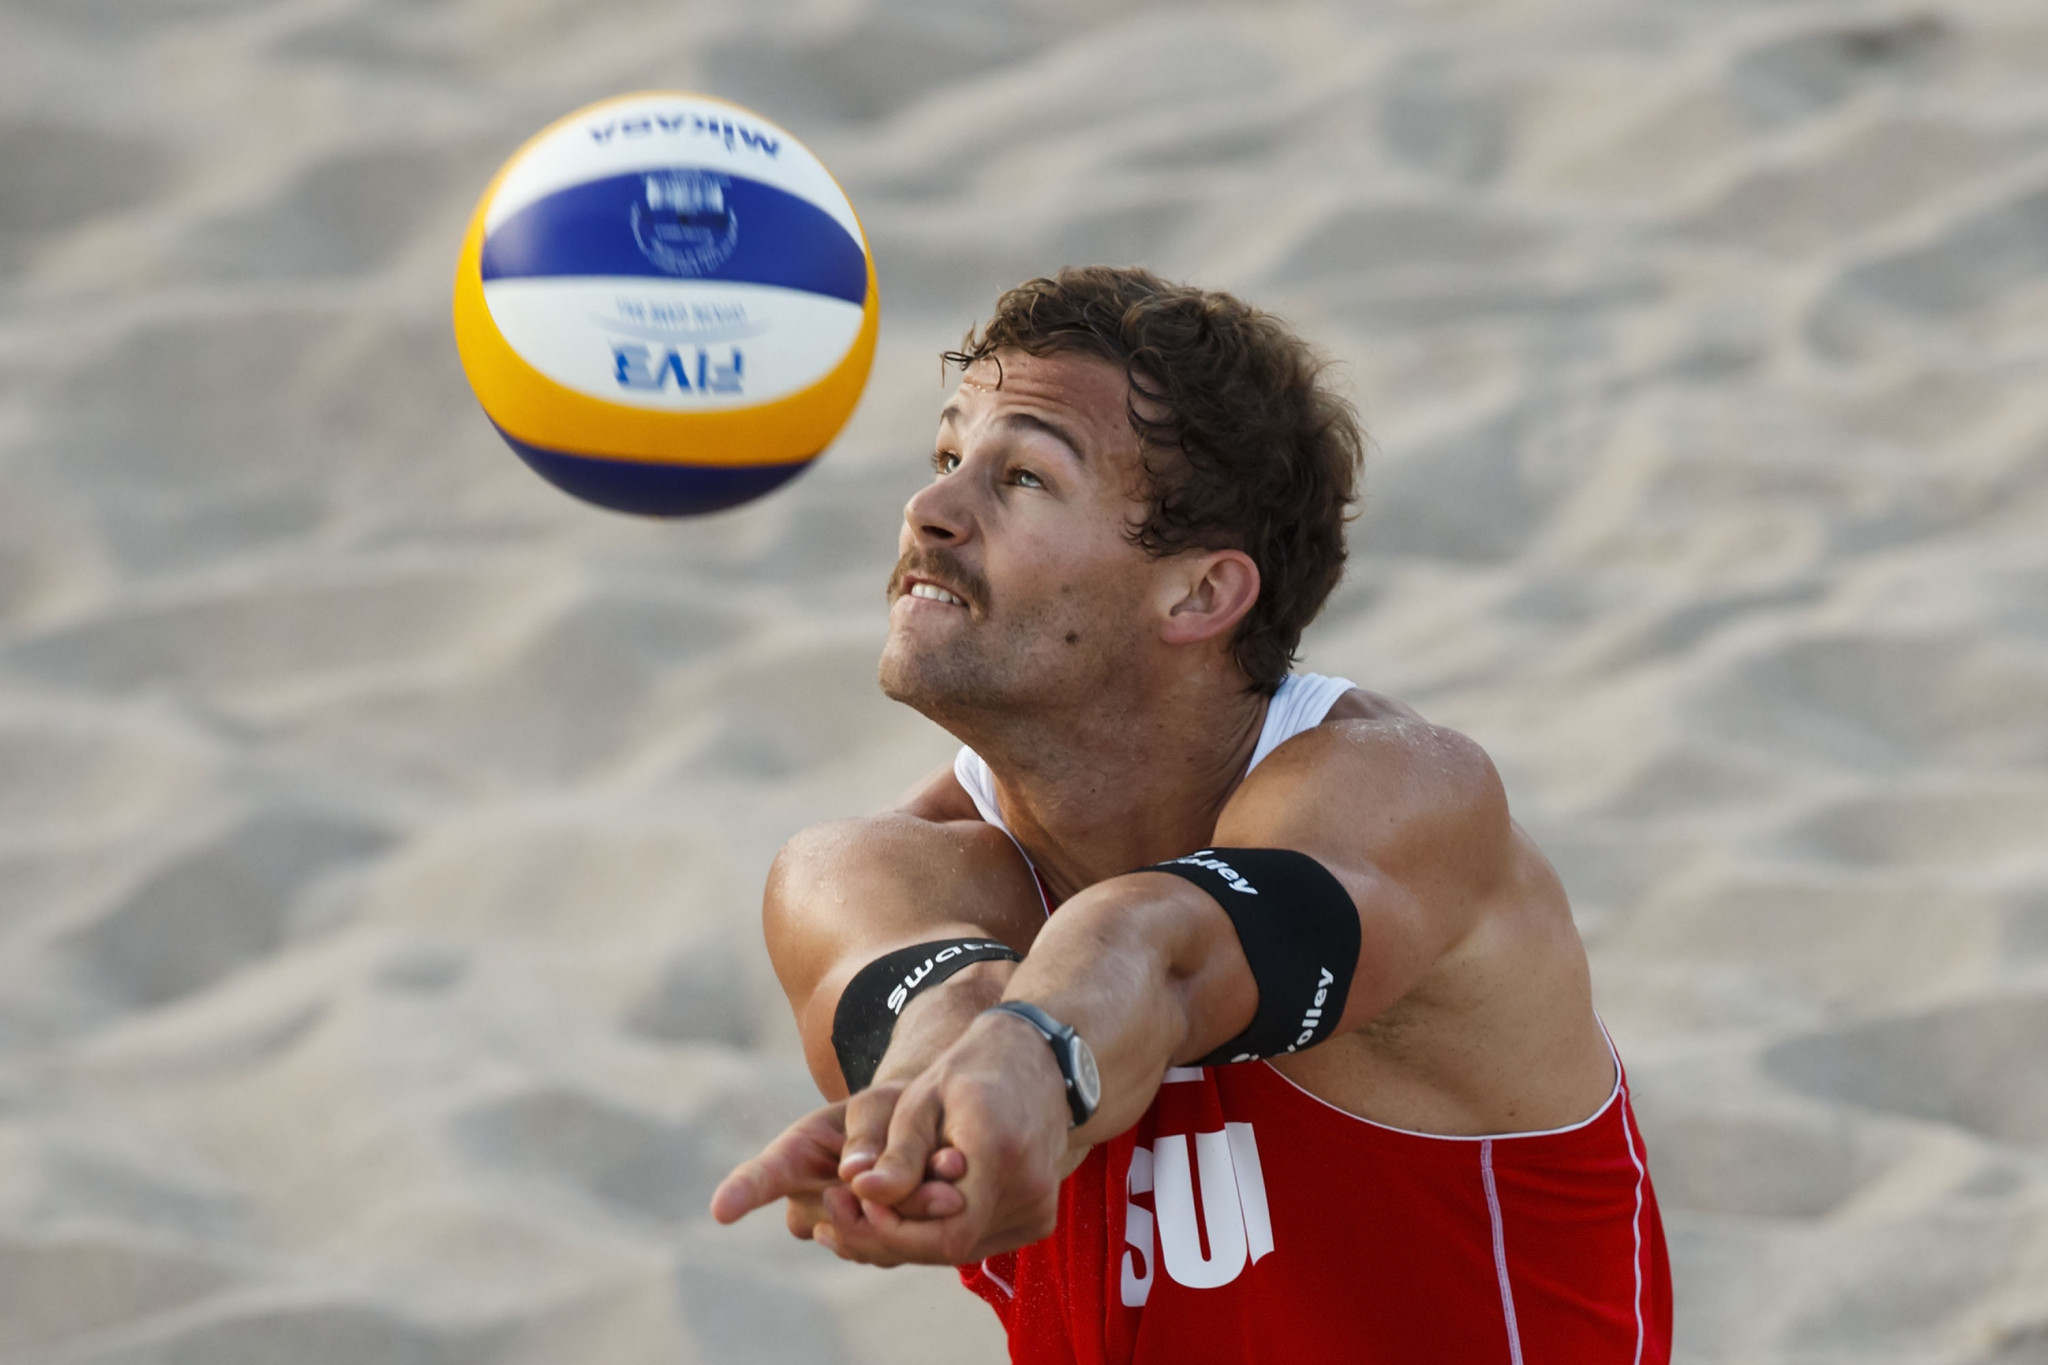 Italian pair spring surprise to qualify for Beach Volleyball World Tour main draw in Cancun